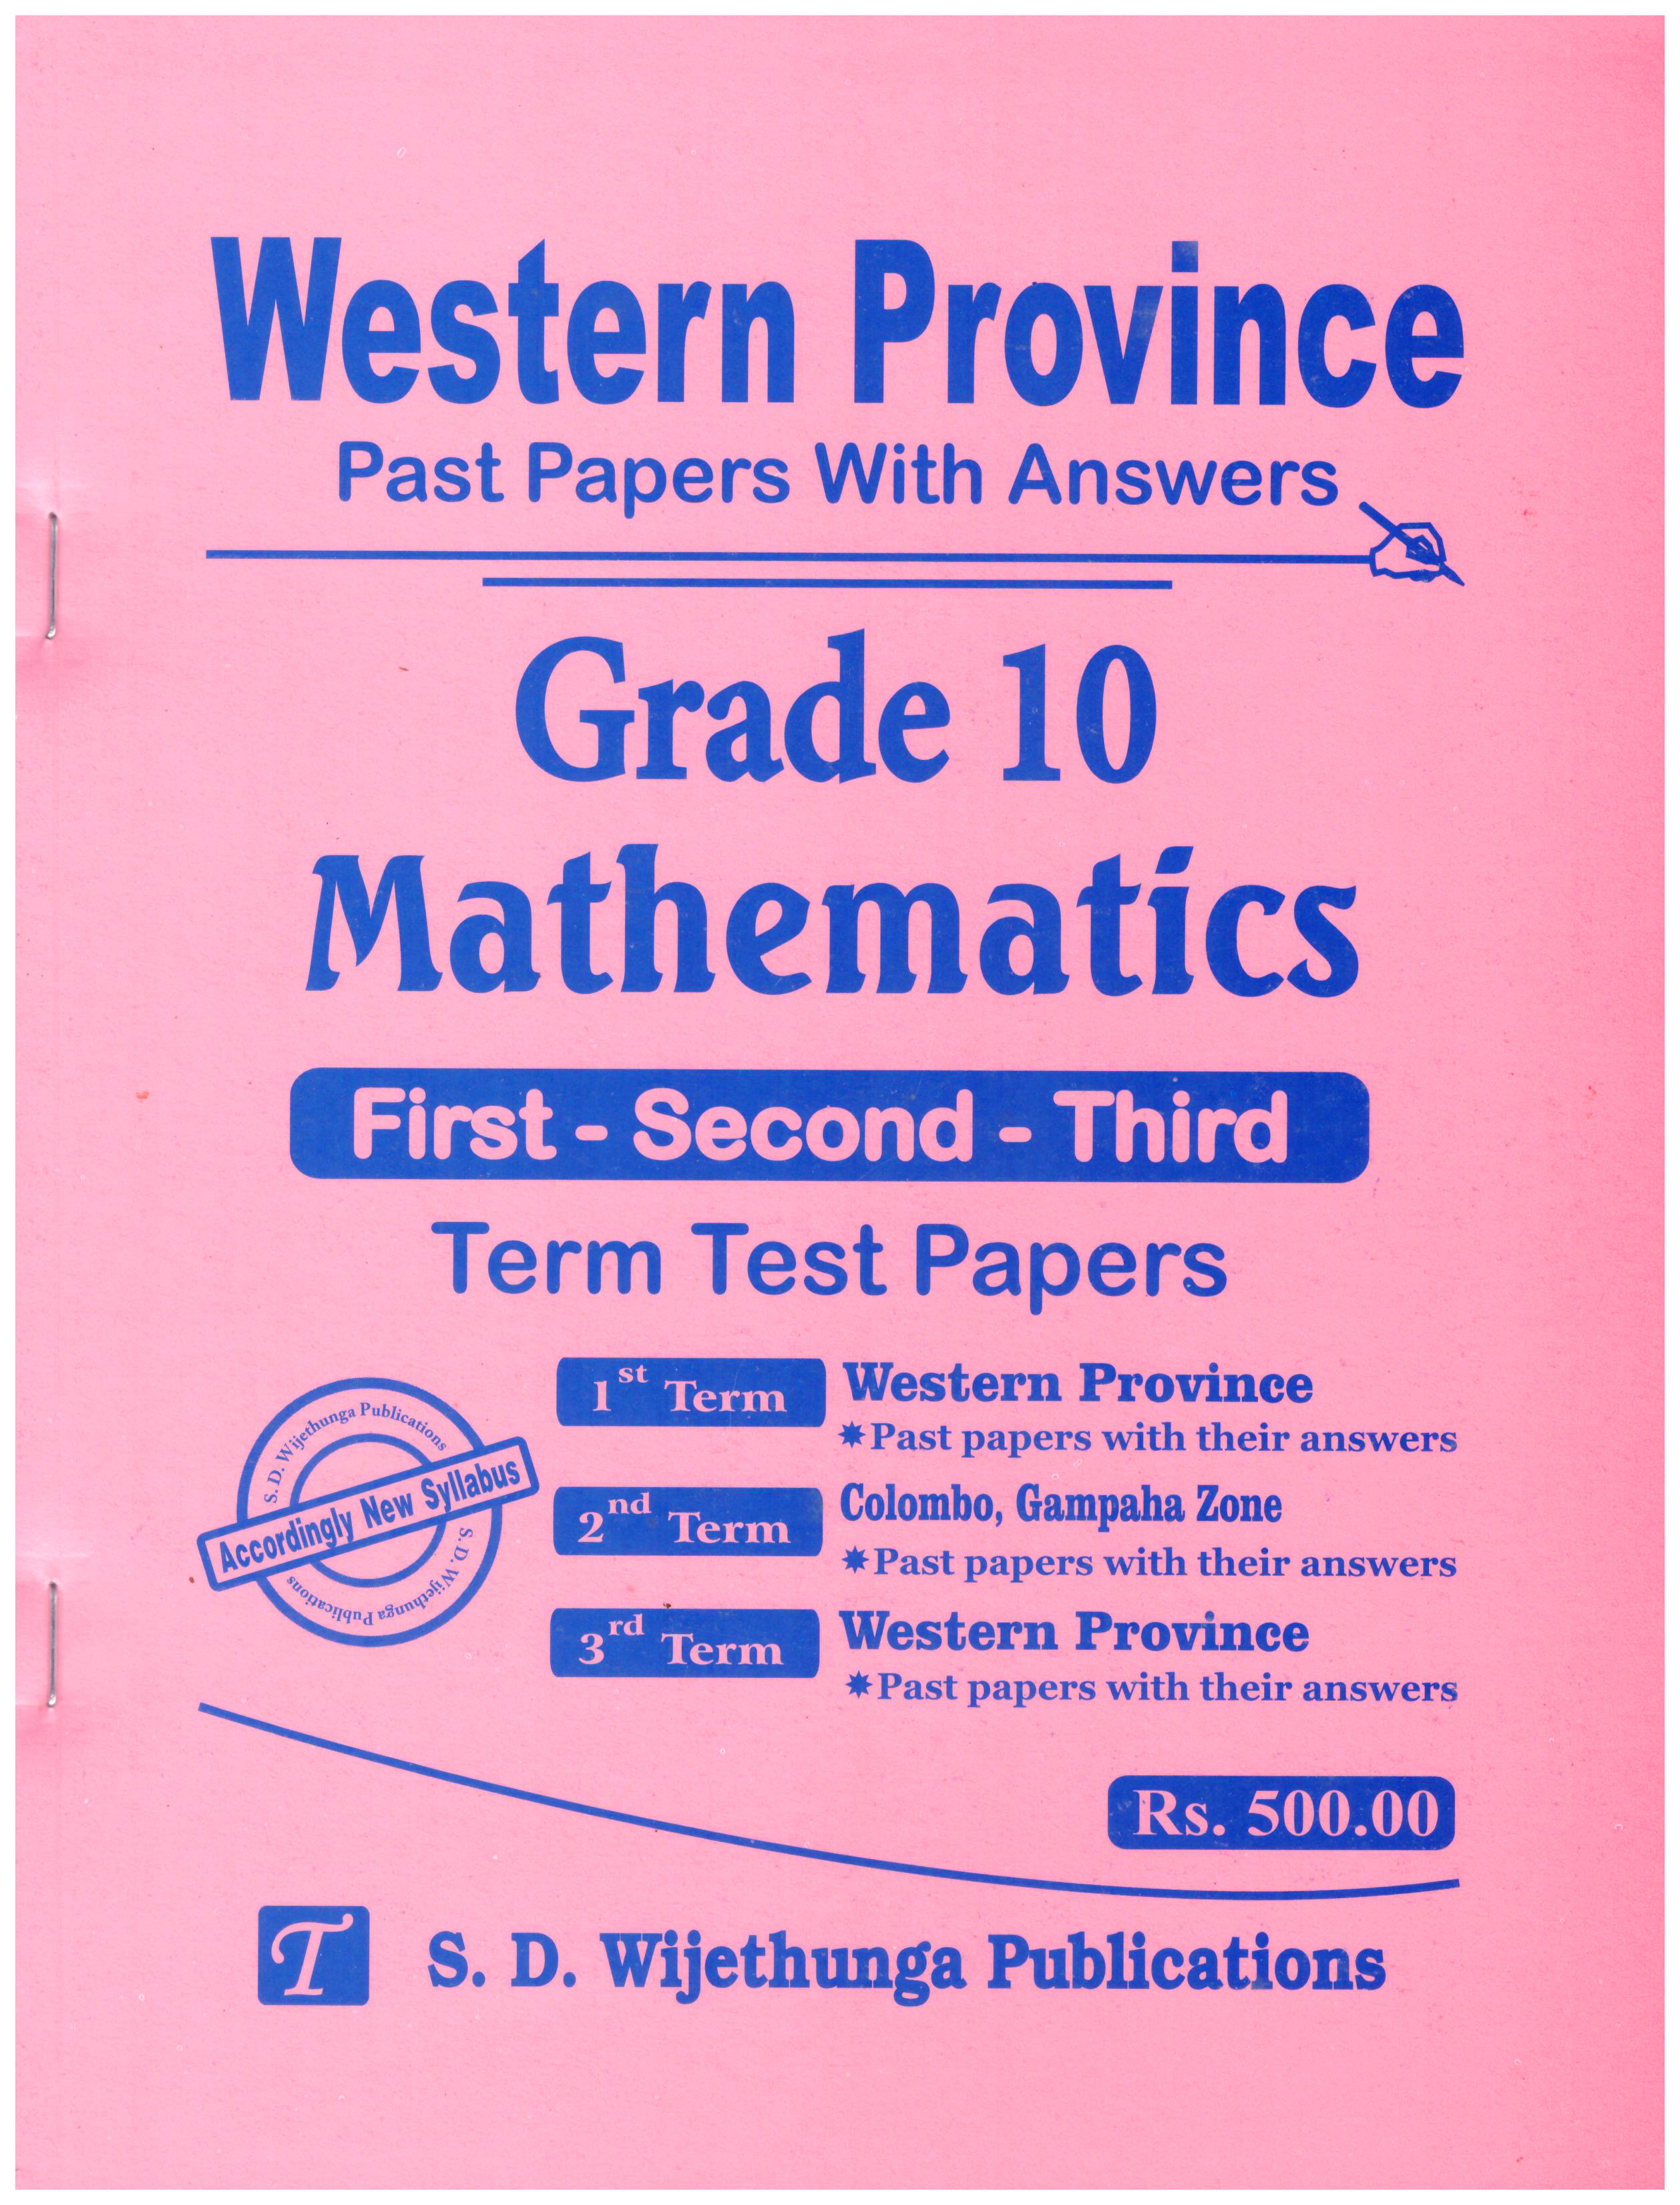 Western Province Past Papers With Answers Grade 10  Mathematics First - Second - Third Term Test Papers (English Medium)